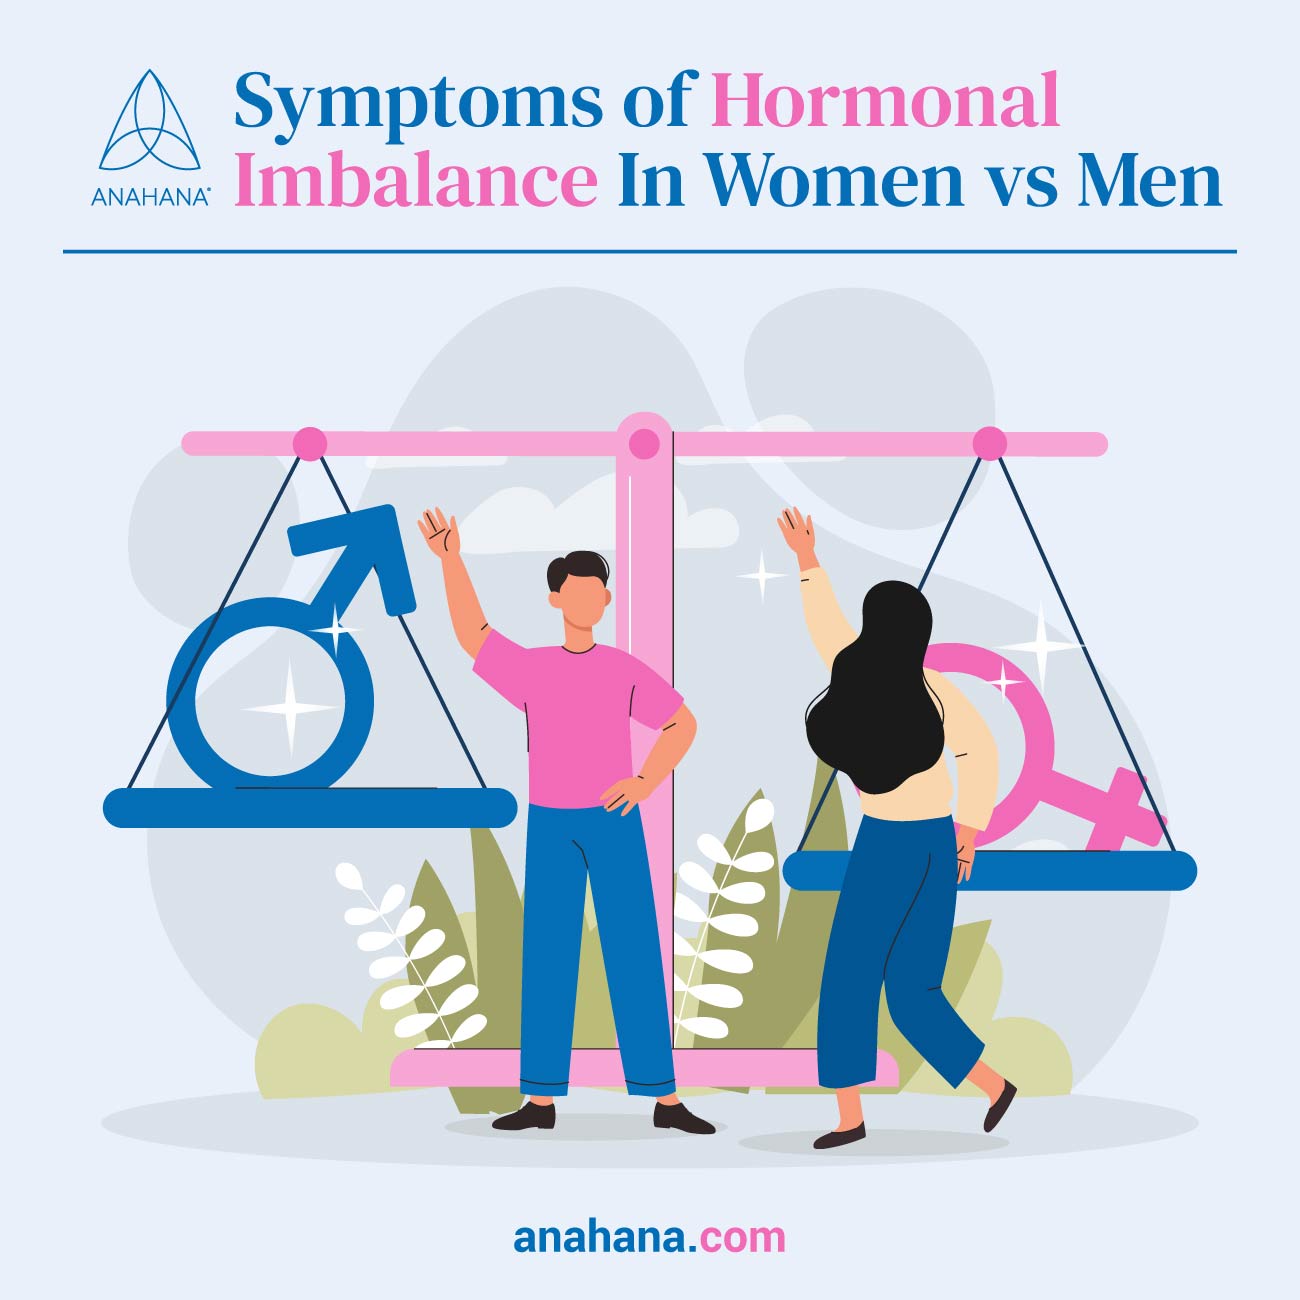 Symptoms of hormonal imparlance in women and men